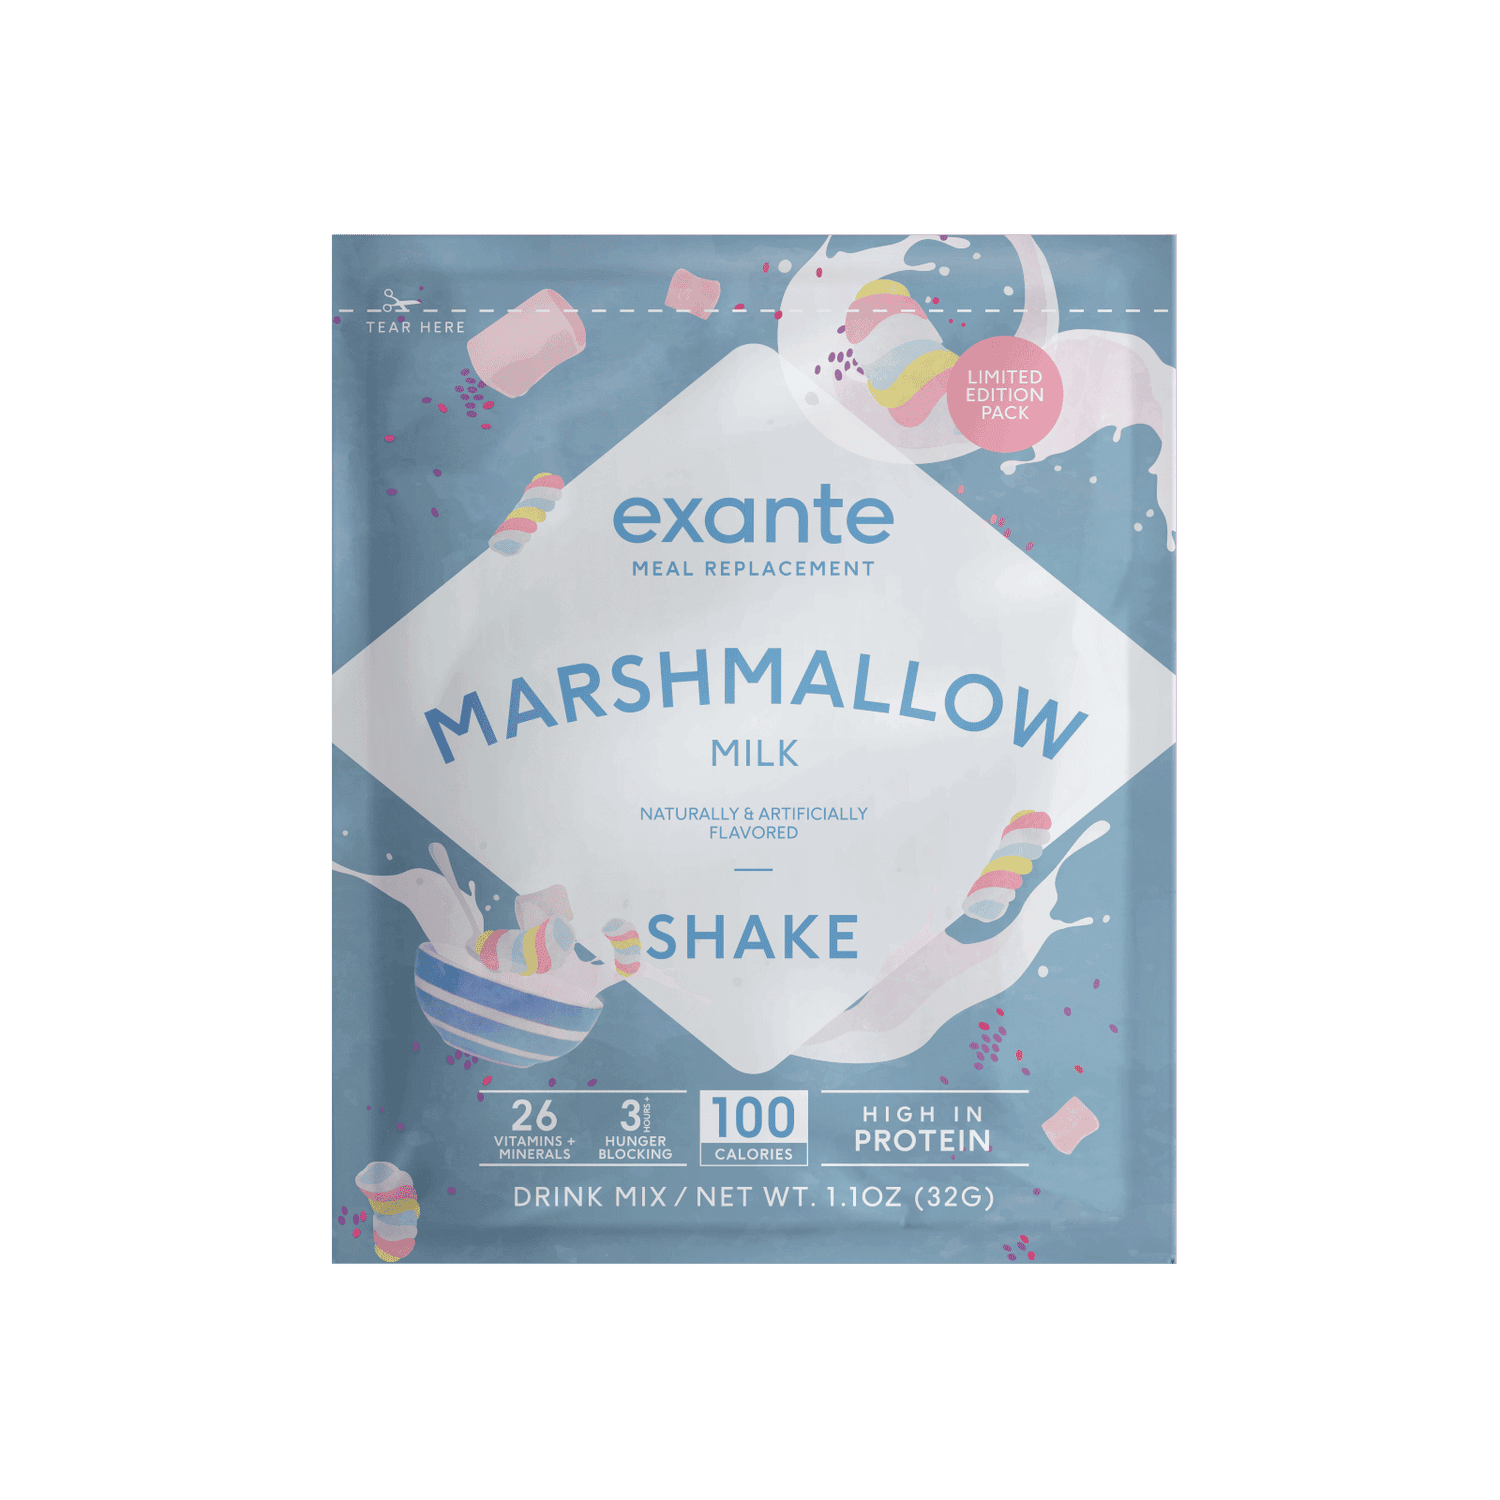 Marshmallow Milk Cereal Meal Replacement Shake - Sample